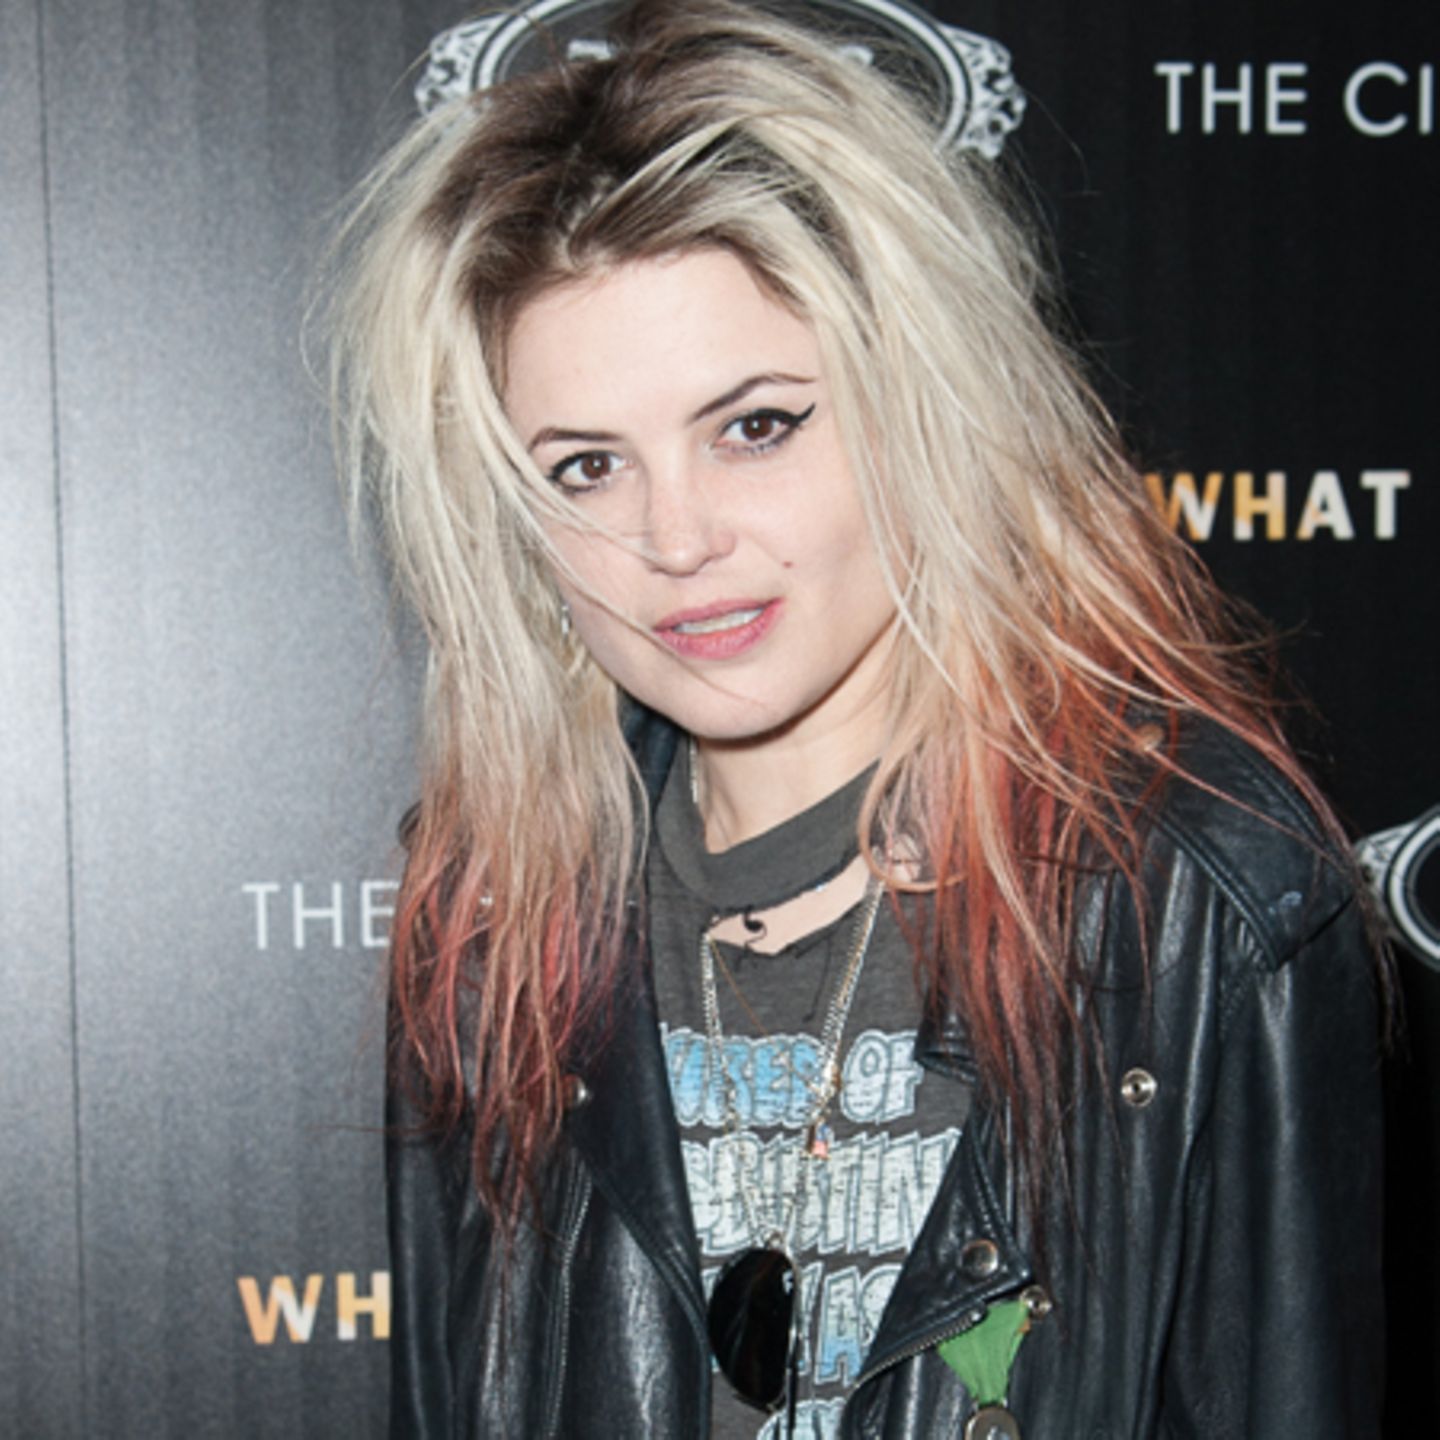 Alison Mosshart Hiding Married Life With Partner? Her 